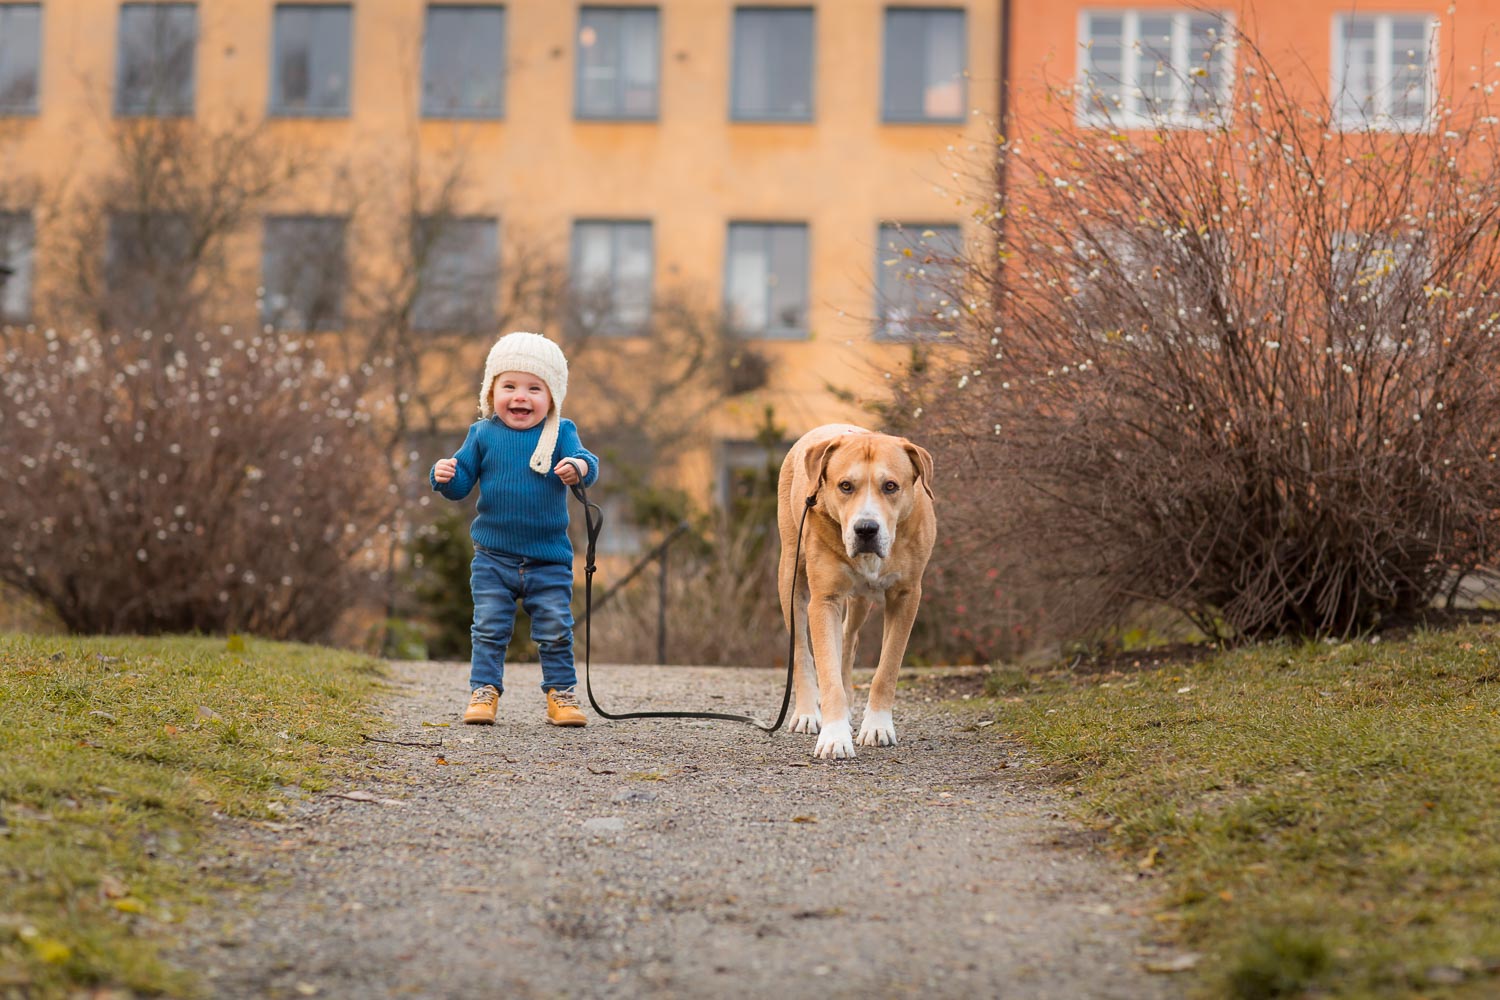 A-photo-of-a-little-girl-and-her-dog-in-Stockholm-by-Sandra-Jolly.jpg